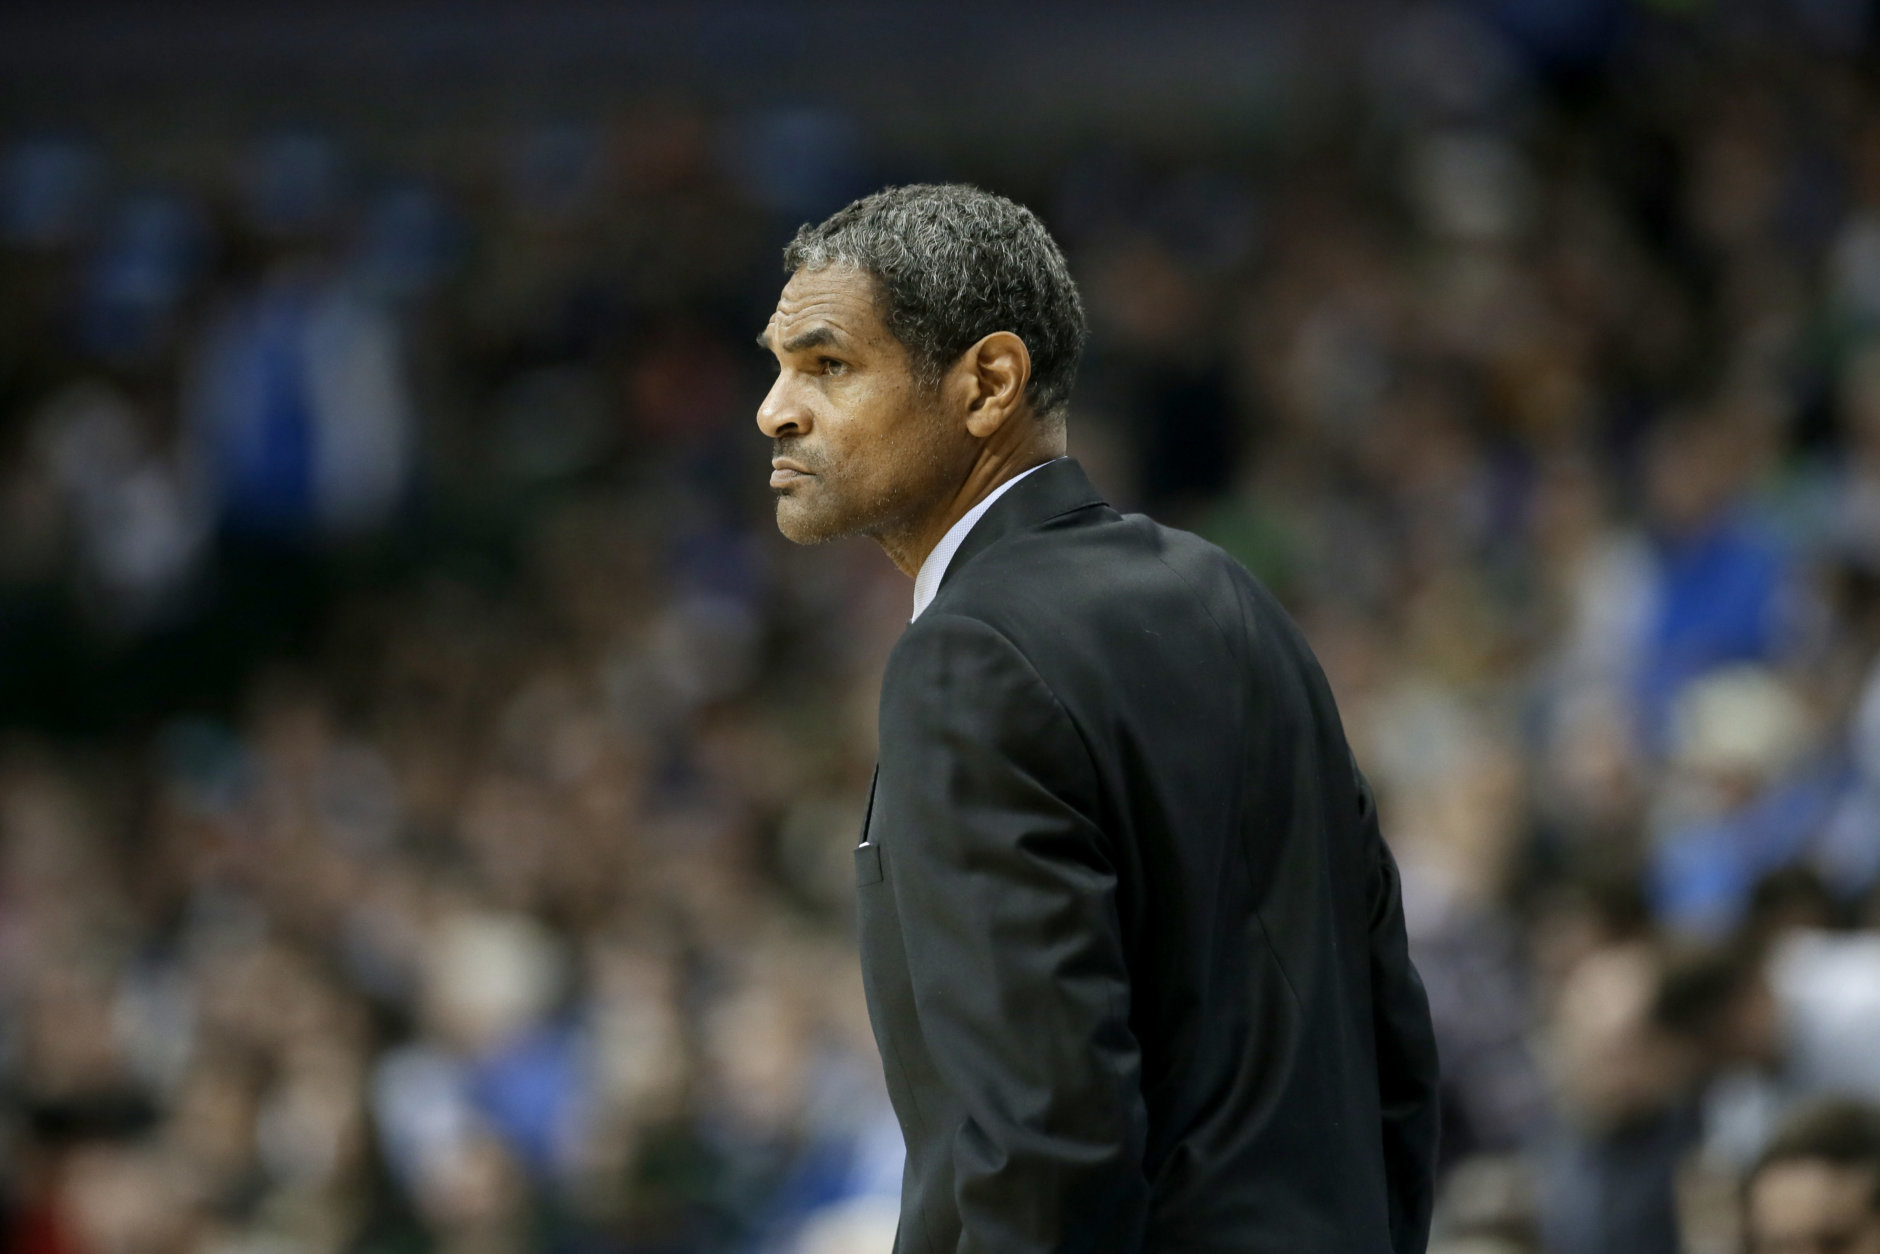 Detroit Pistons head coach Maurice Cheeks watches play in the first half of an NBA basketball game against the Dallas Mavericks, Sunday, Jan. 26, 2014, in Dallas. (AP Photo/Tony Gutierrez)